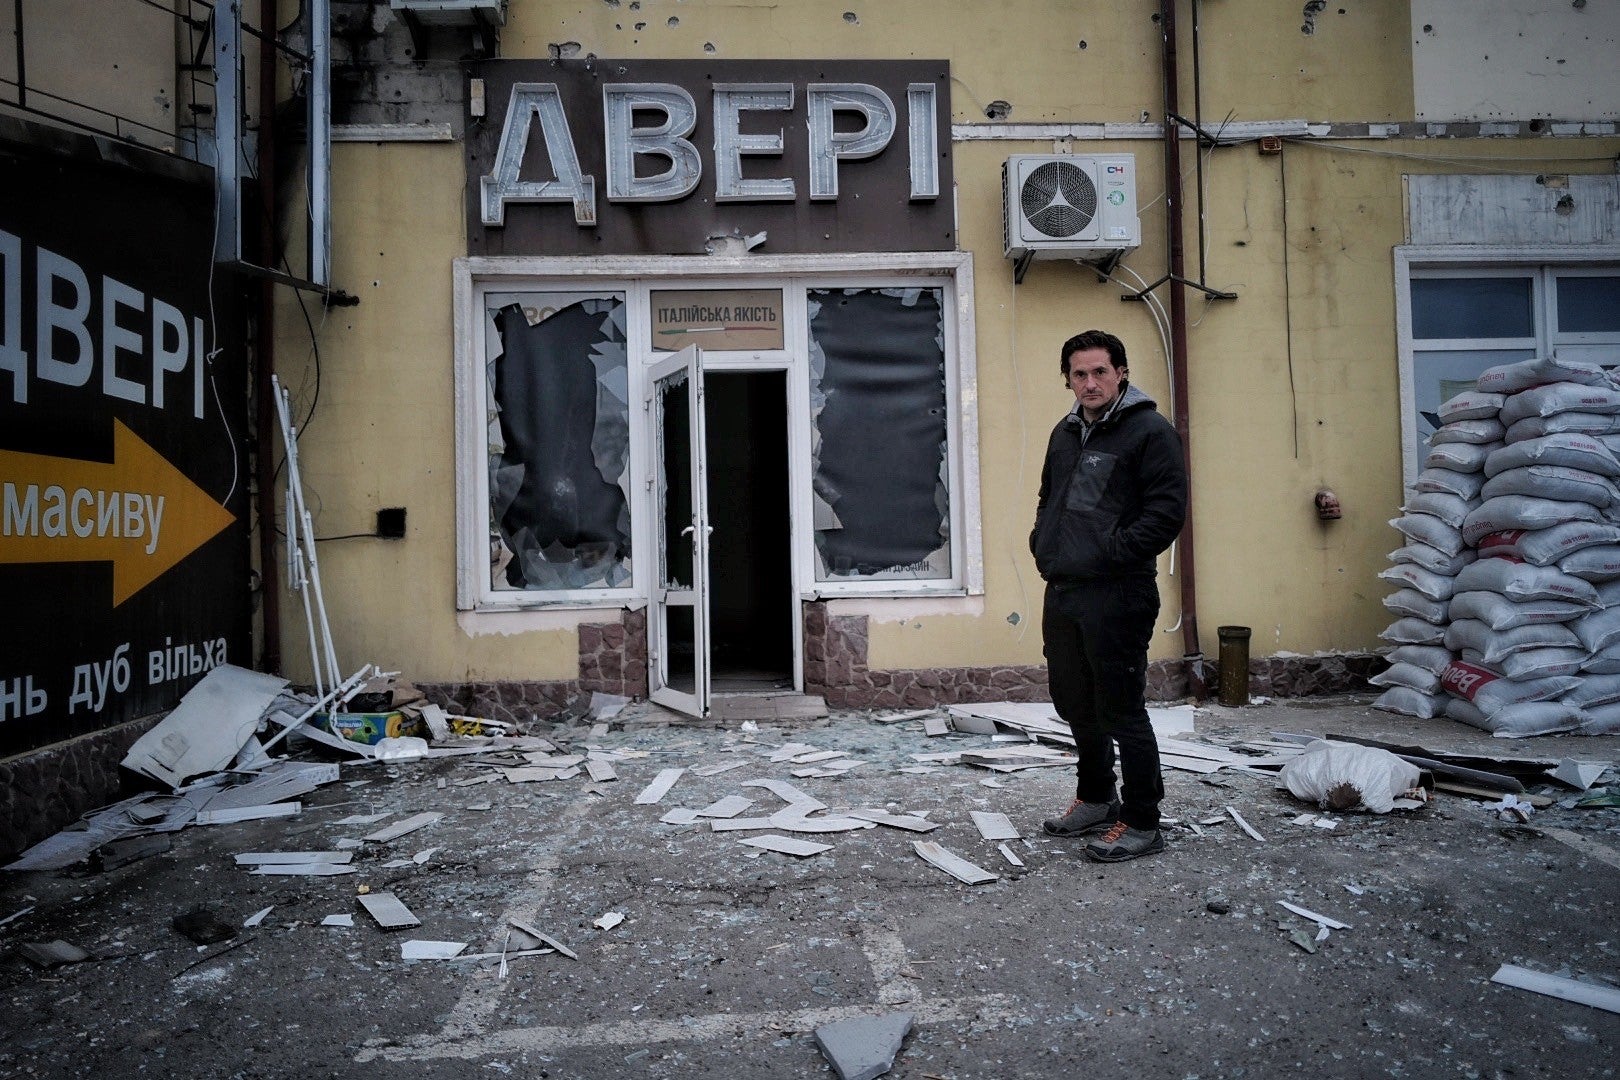 MP Johnny Mercer in Ukraine as he filmed a Channel 4 Dispatches programme (Channel 4).